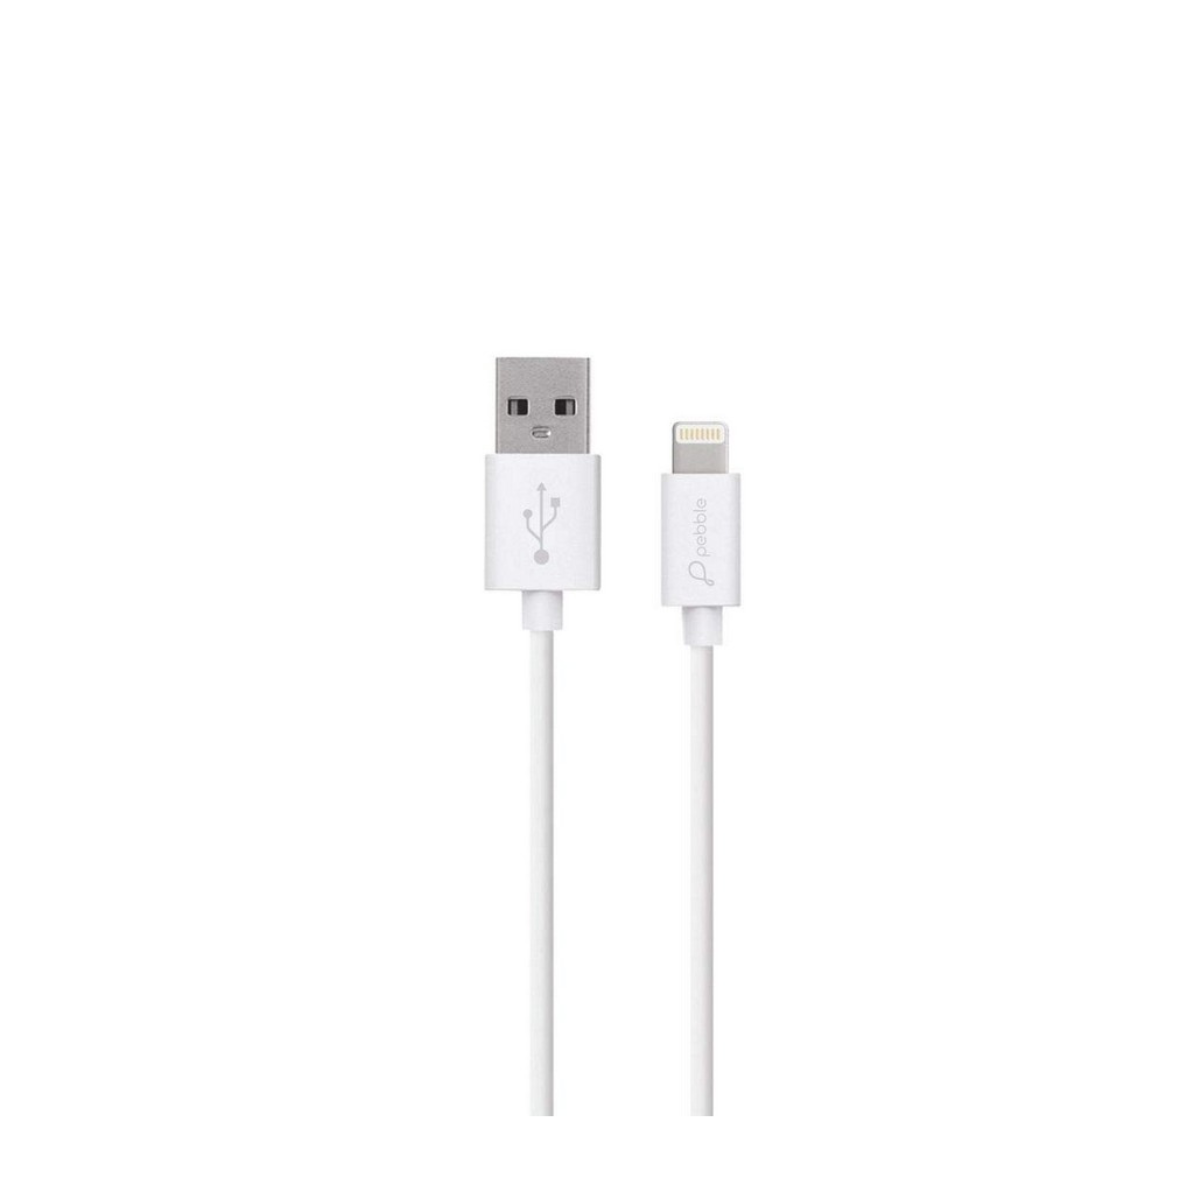 Pebble Fast Charging USB Cable PBCL10 - Lightning Charge And Sync Cable 2.4A - White